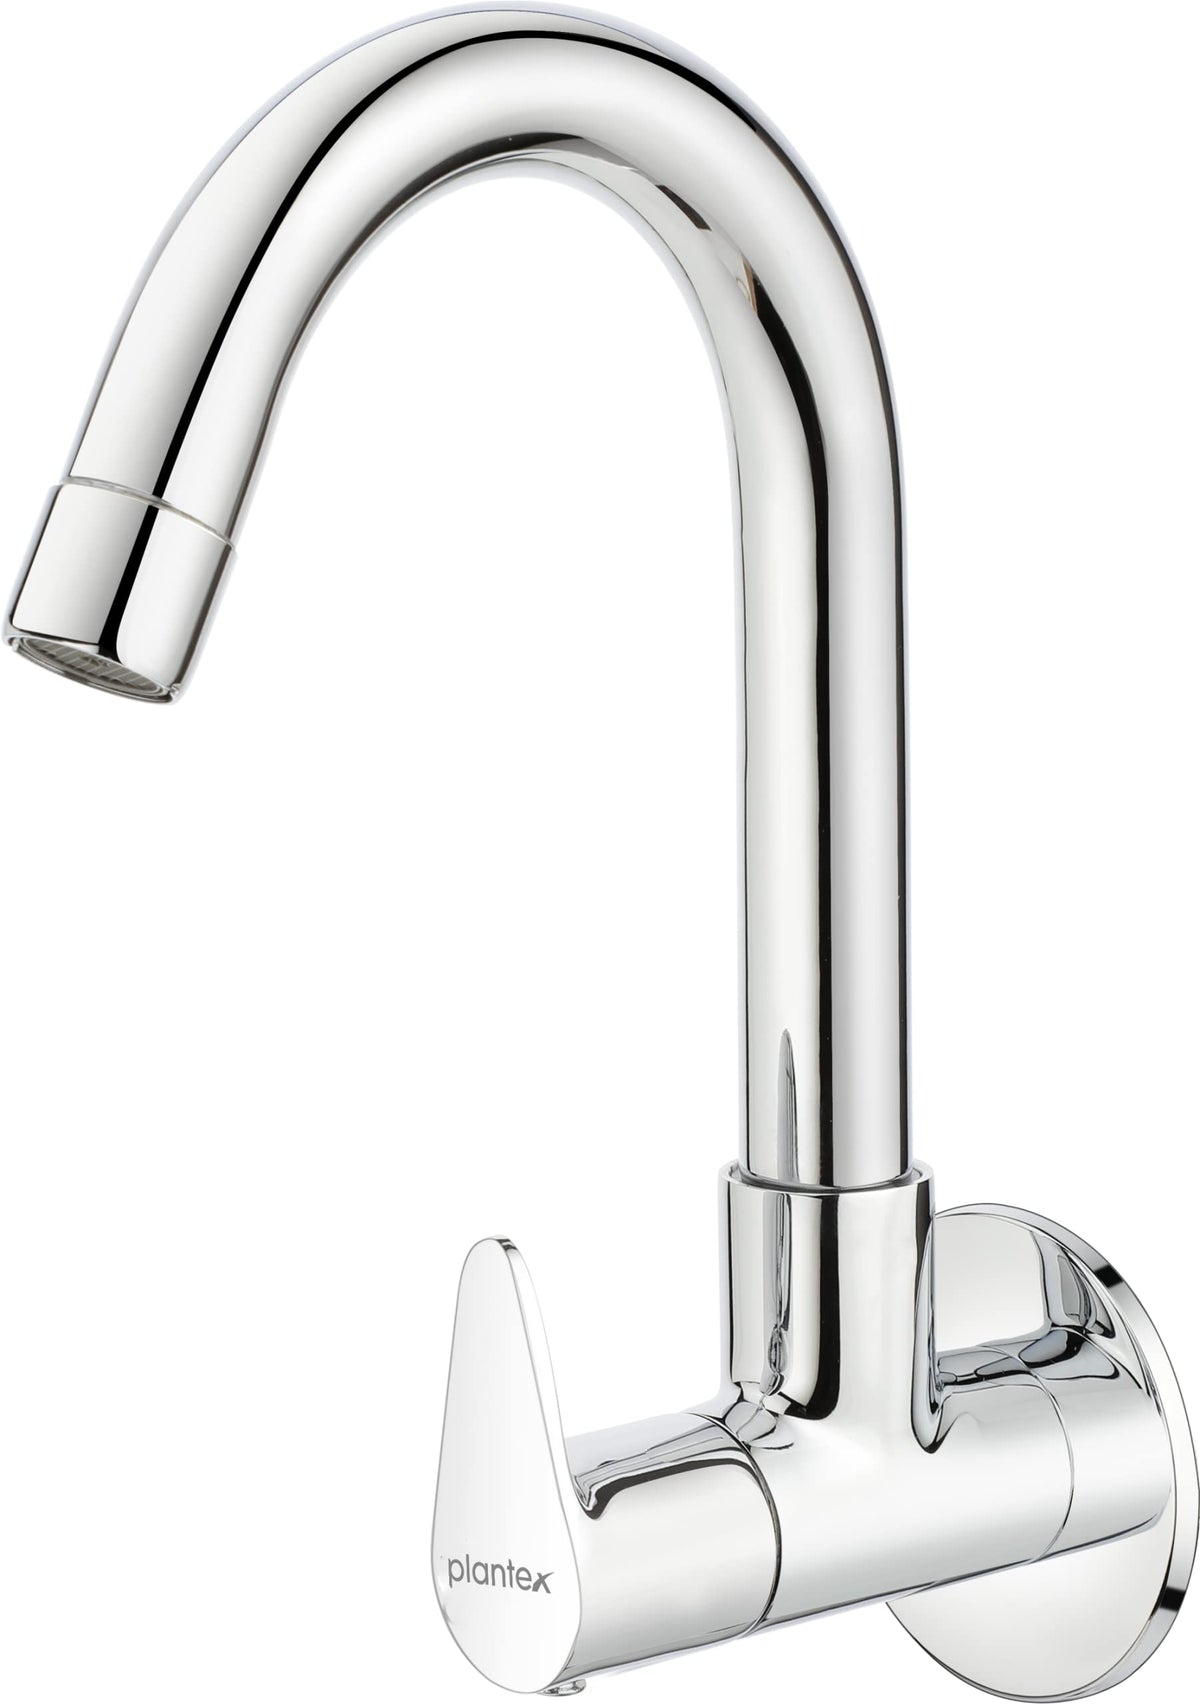 Plantex Pure Brass PAC-1810 Single Lever Sink Cock with (High Arch 360 Degree) Swivel Spout for Kitchen Faucet/Sink Tap with Brass Wall Flange & Teflon Tape (Mirror-Chrome Finish)